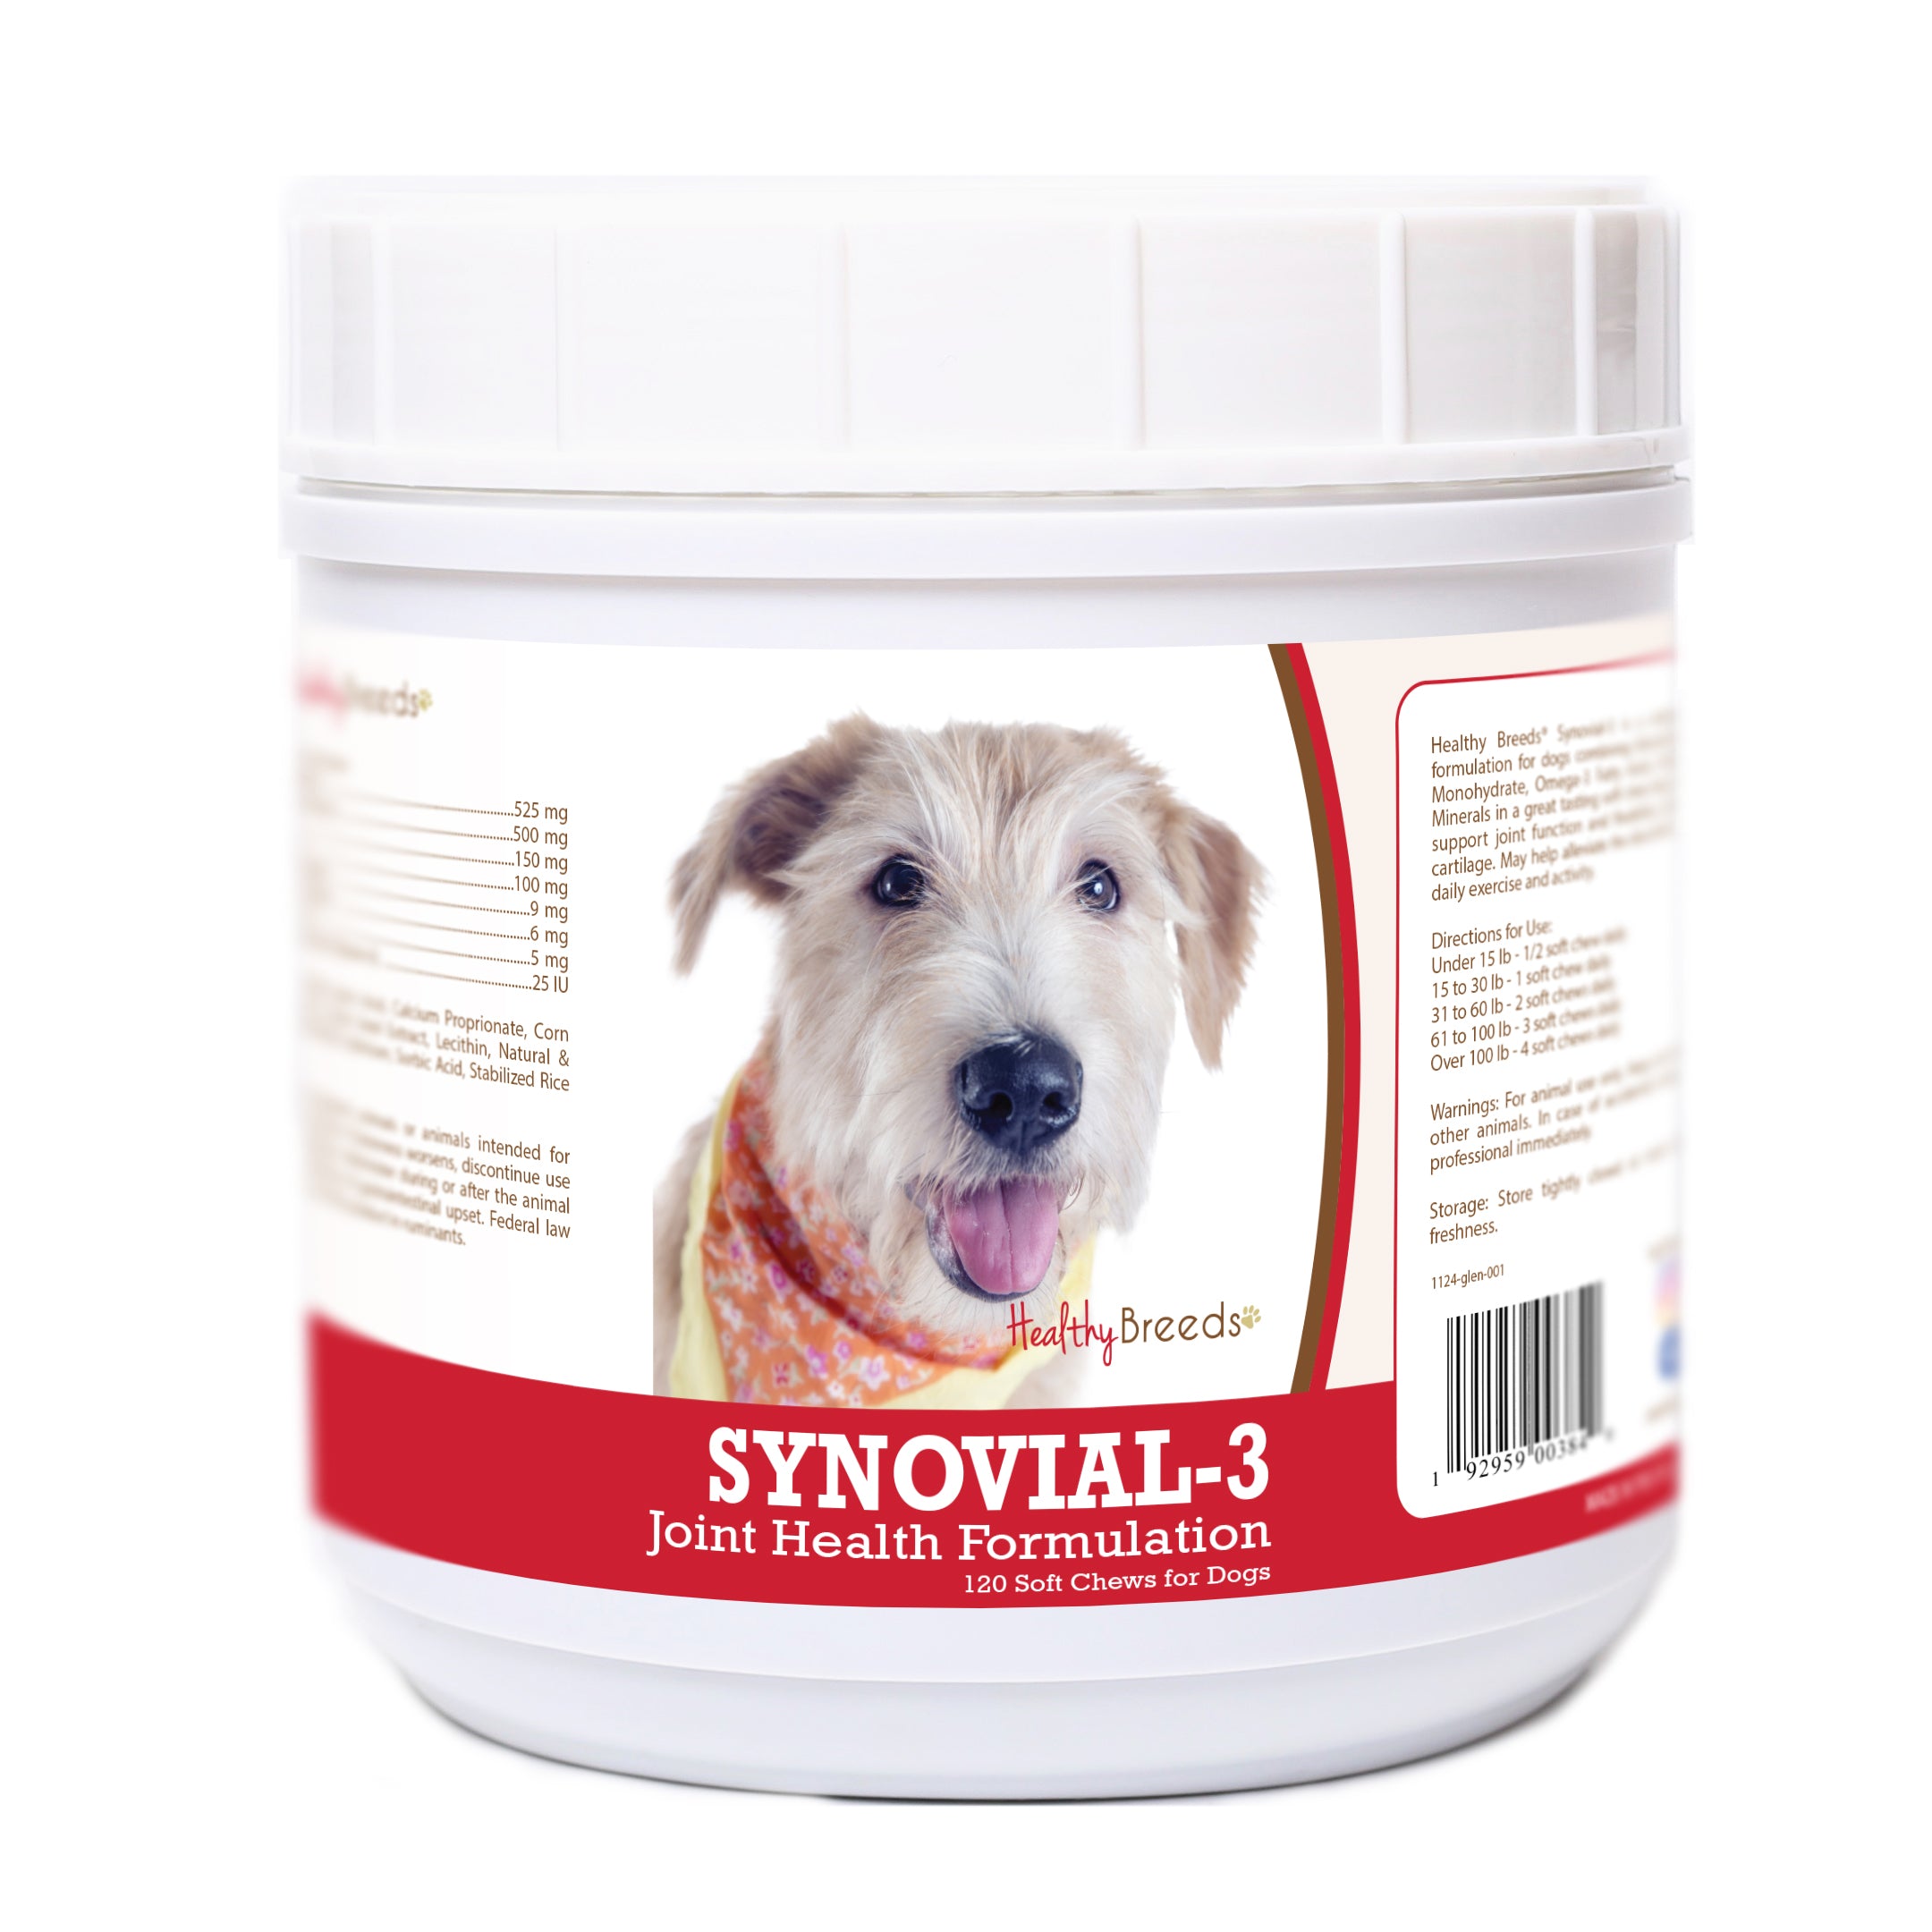 Glen of Imaal Terrier Synovial-3 Joint Health Formulation Soft Chews 120 Count